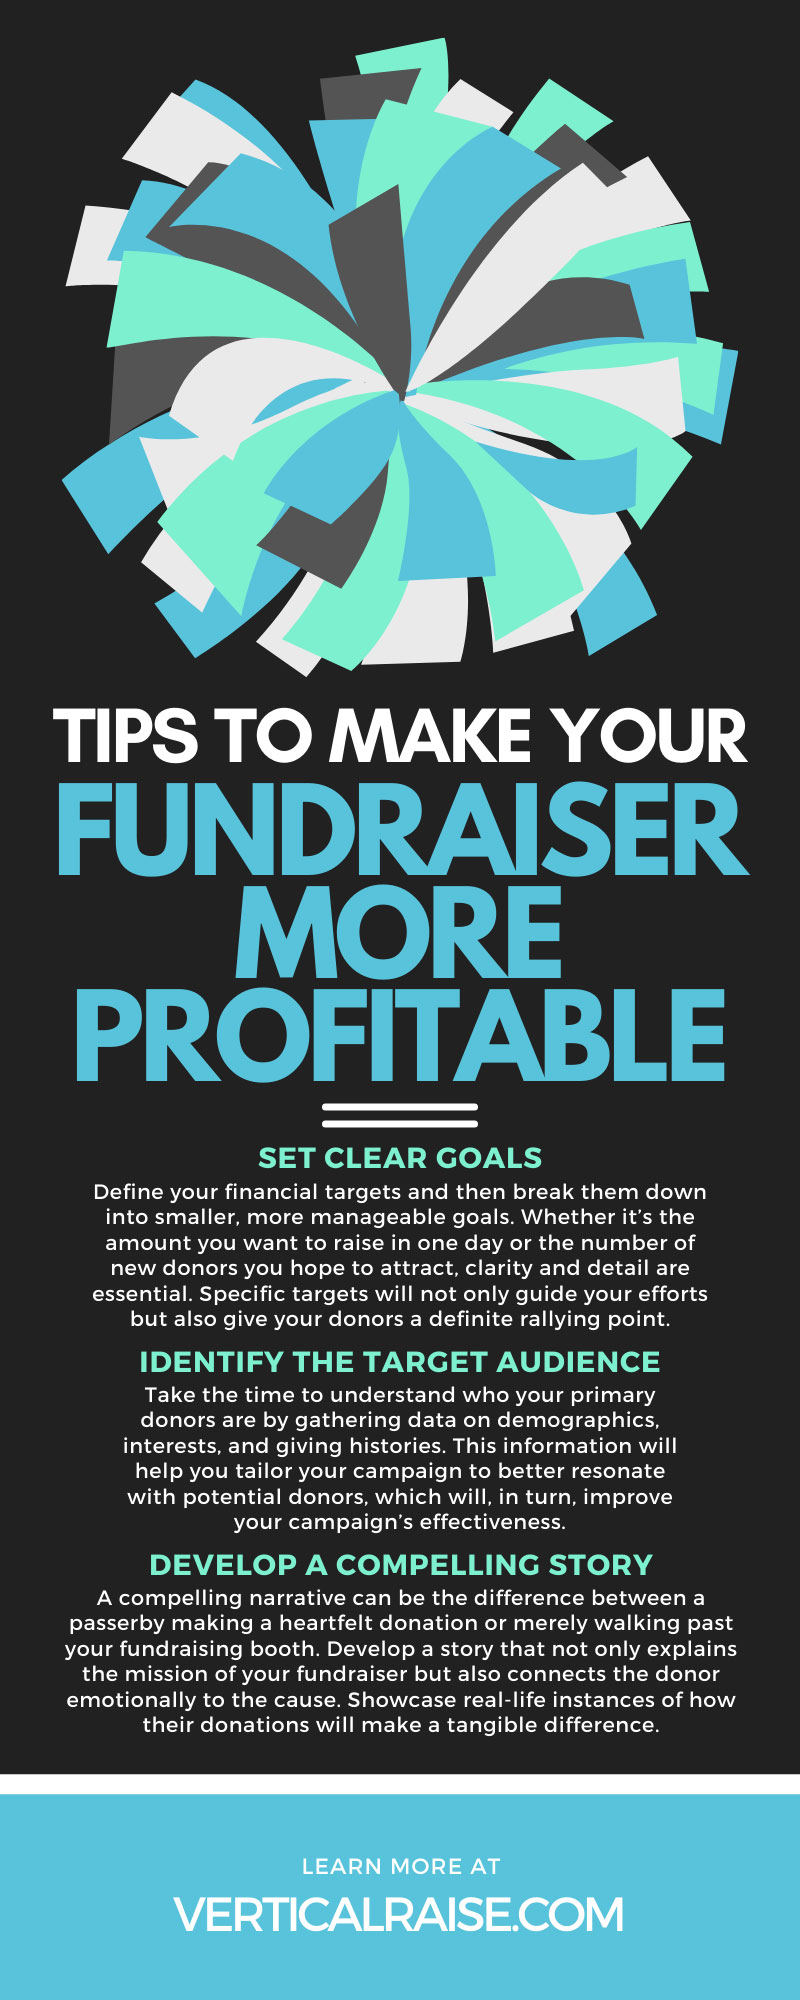 8 Tips To Make Your Fundraiser More Profitable